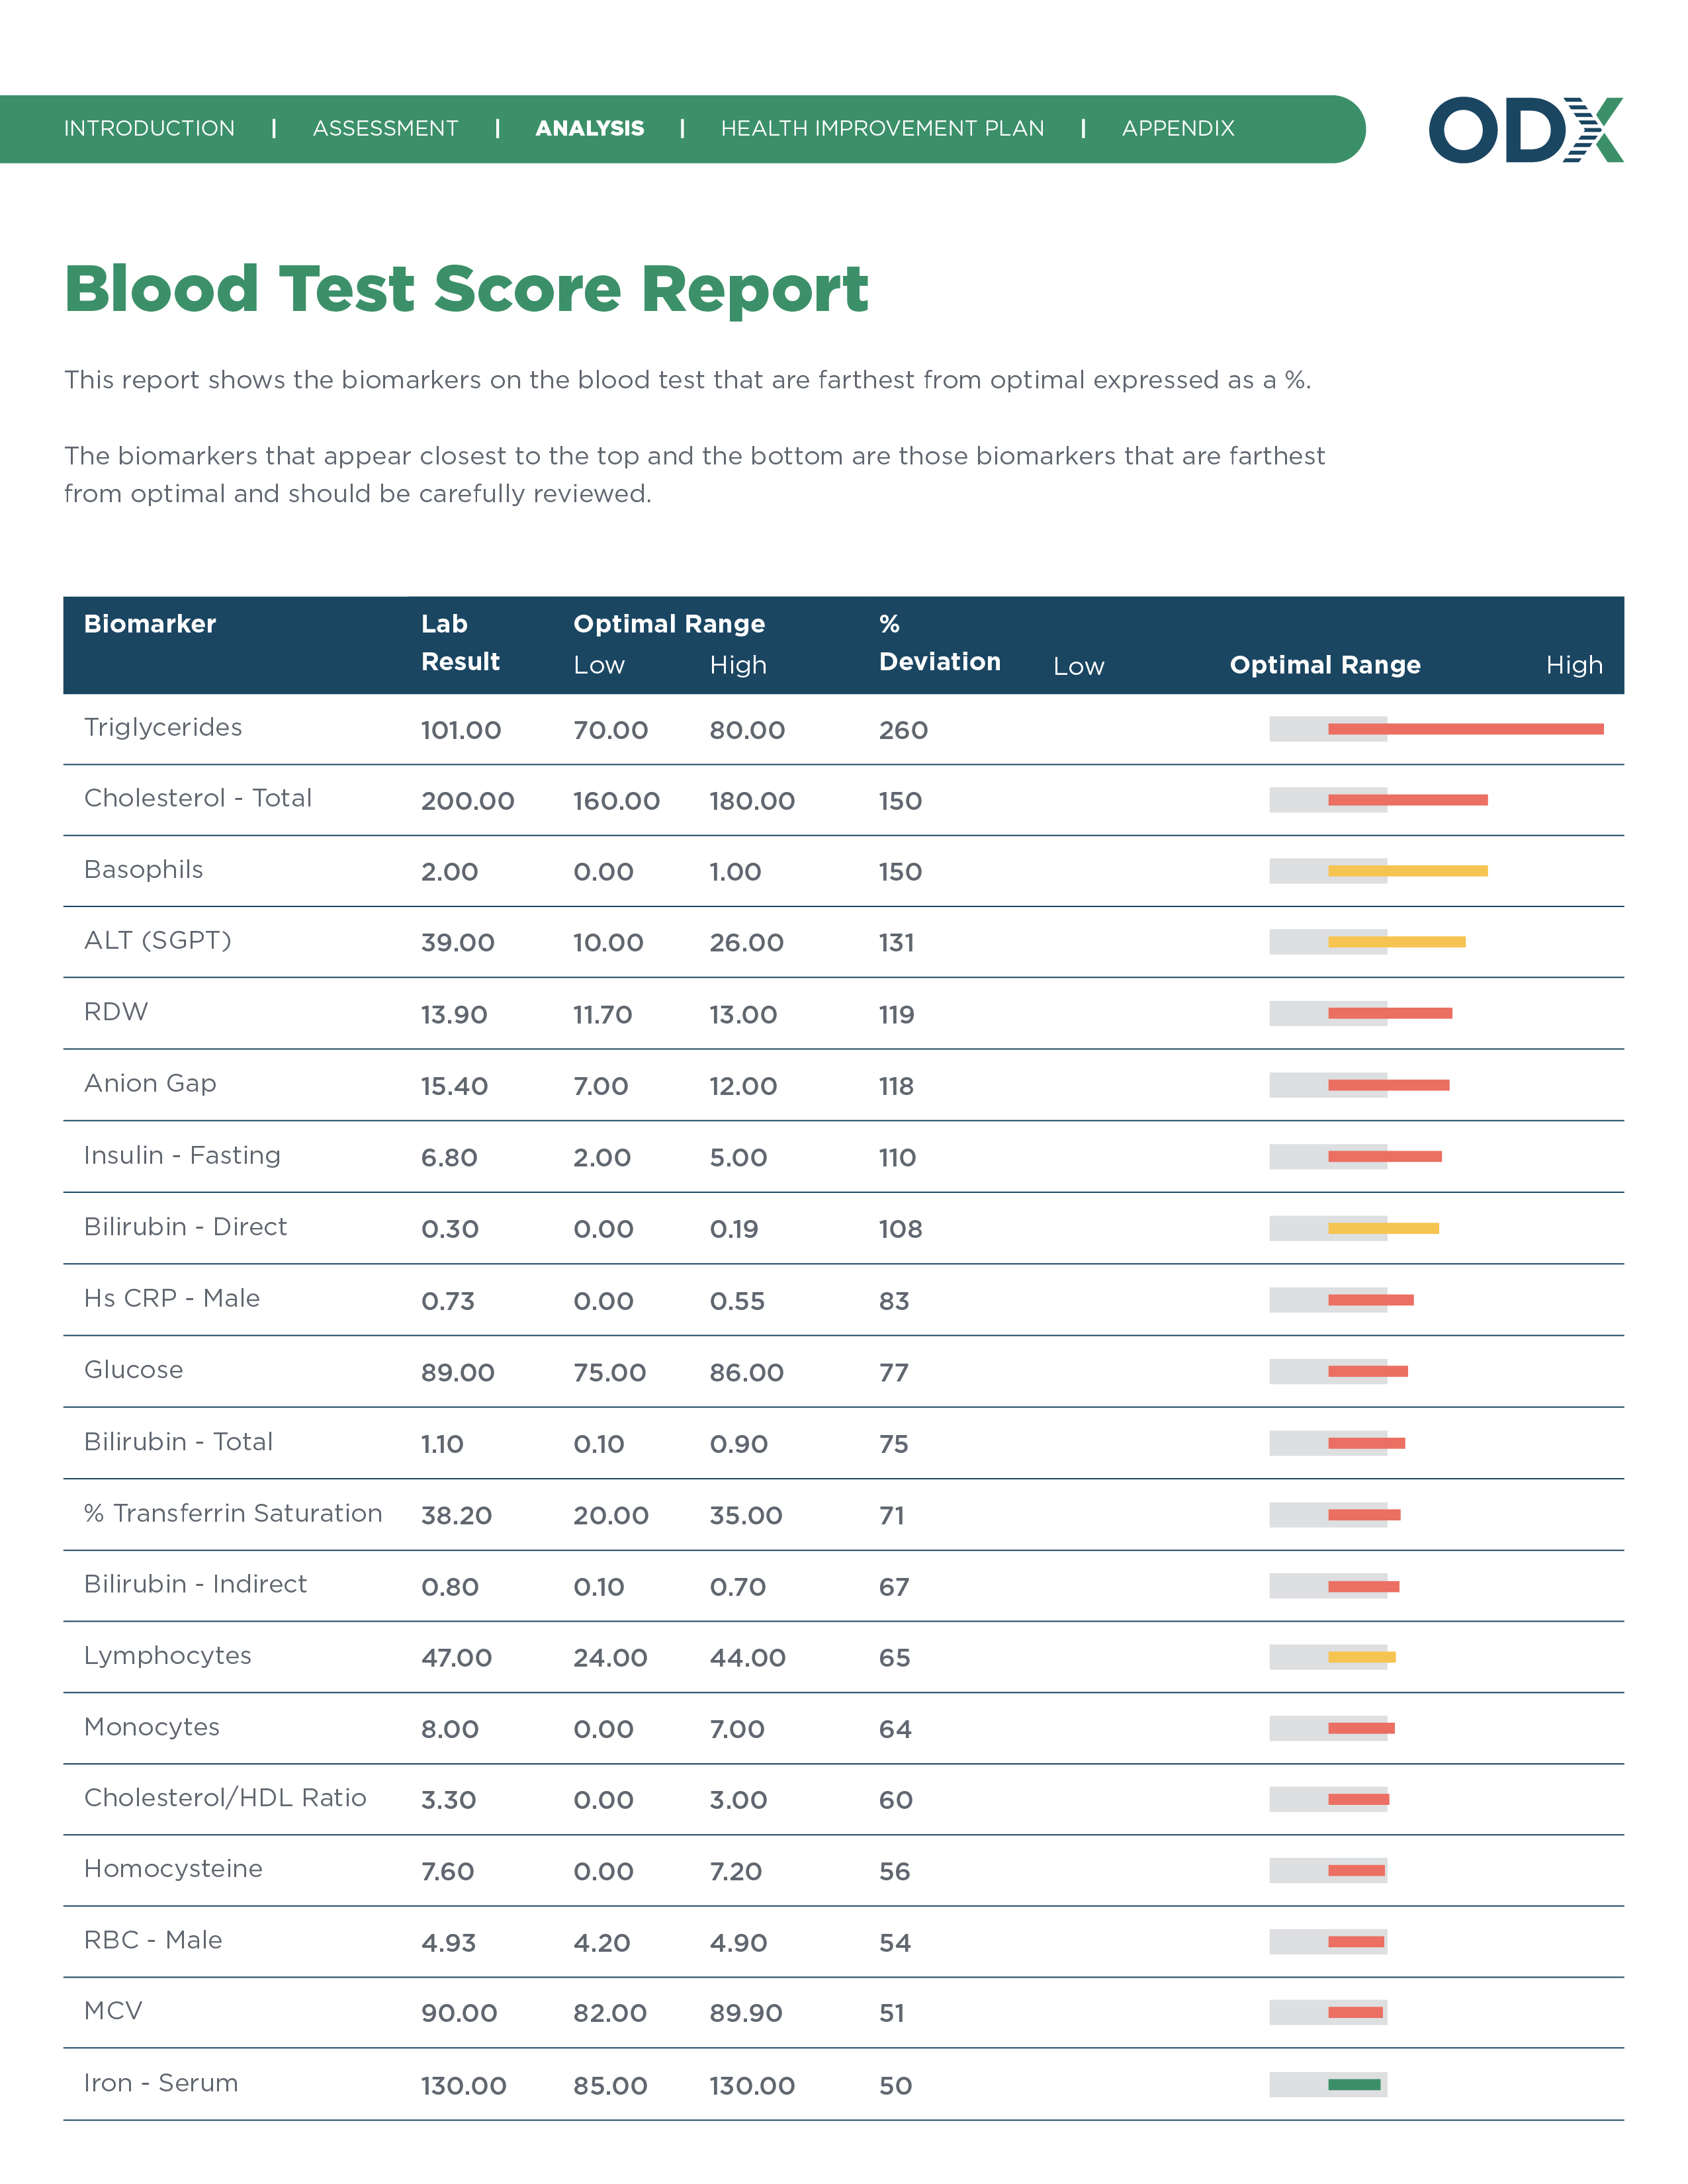 All Report Design for New Site_Blood Test Score Report